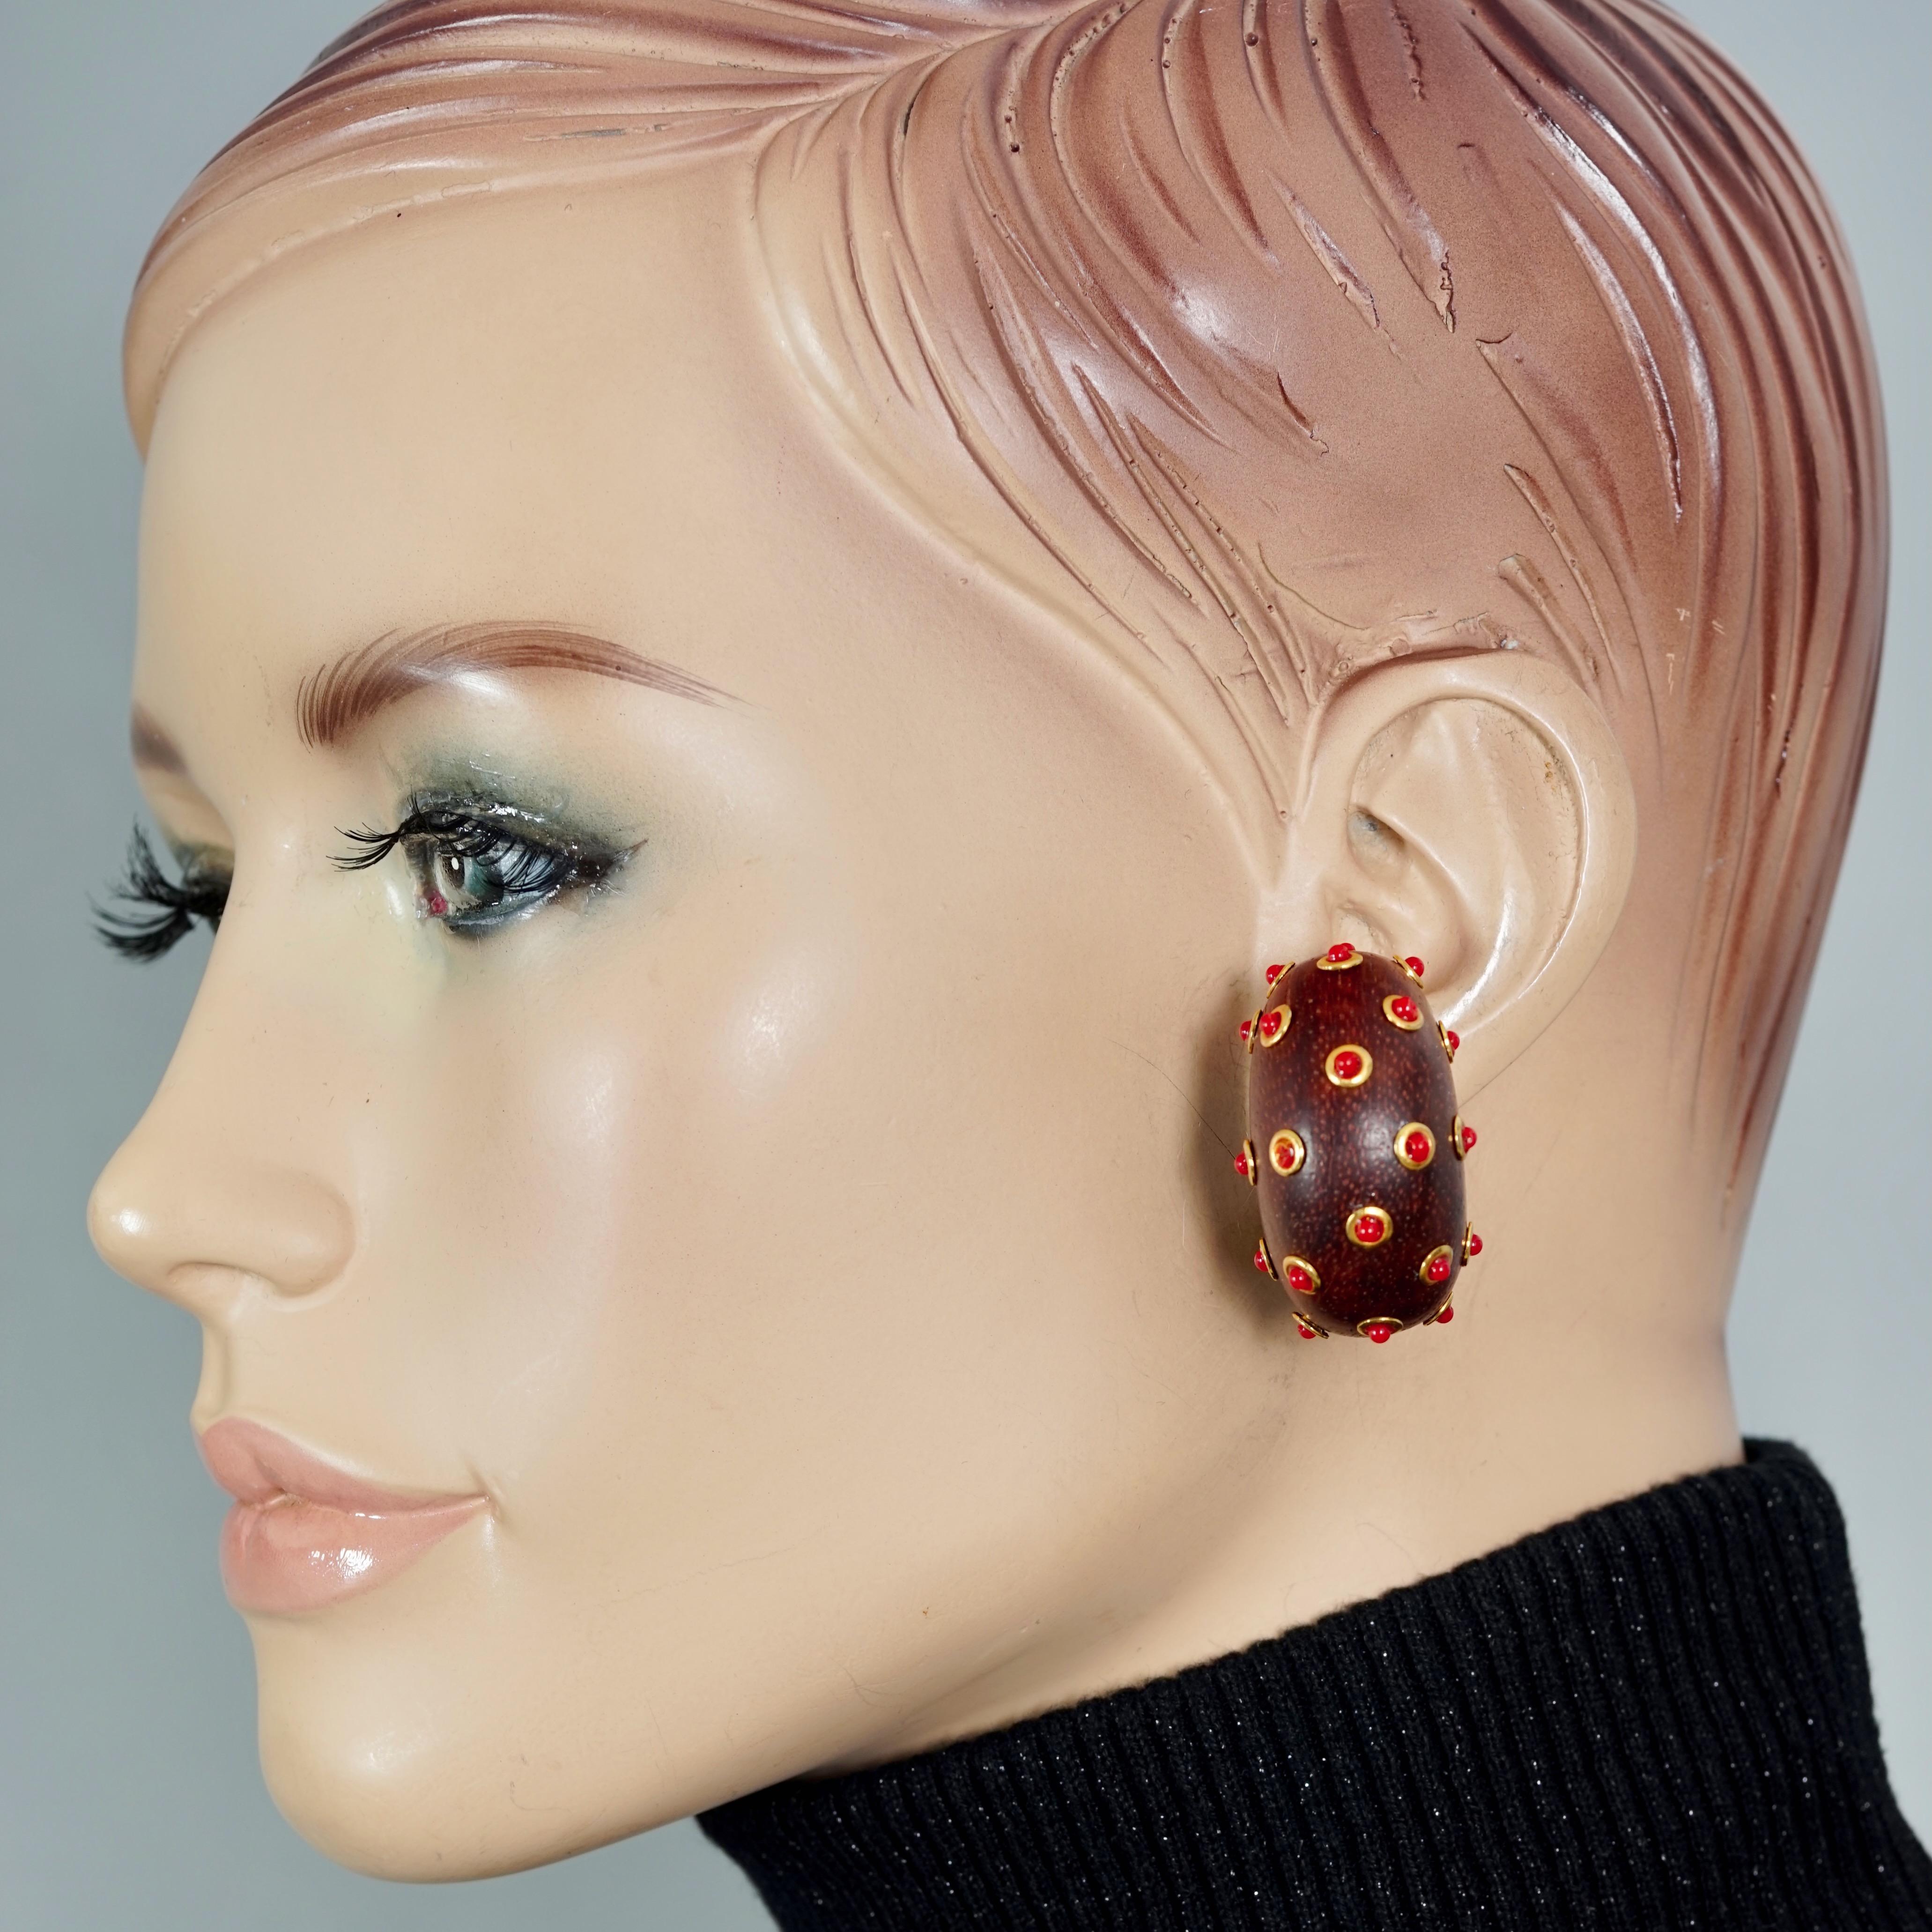 Vintage BARRERA Sputnik Wood Beaded Hoop Earrings

Measurements:
Height: 1.57 inches (4 cm)
Width: 0.83 inch (2.1 cm)
Weight per Earring: 12 grams

Features:
- 100% Authentic DOMINIQUE AURIENTIS.
- Wood hoop earrings with gold tone and orange glass